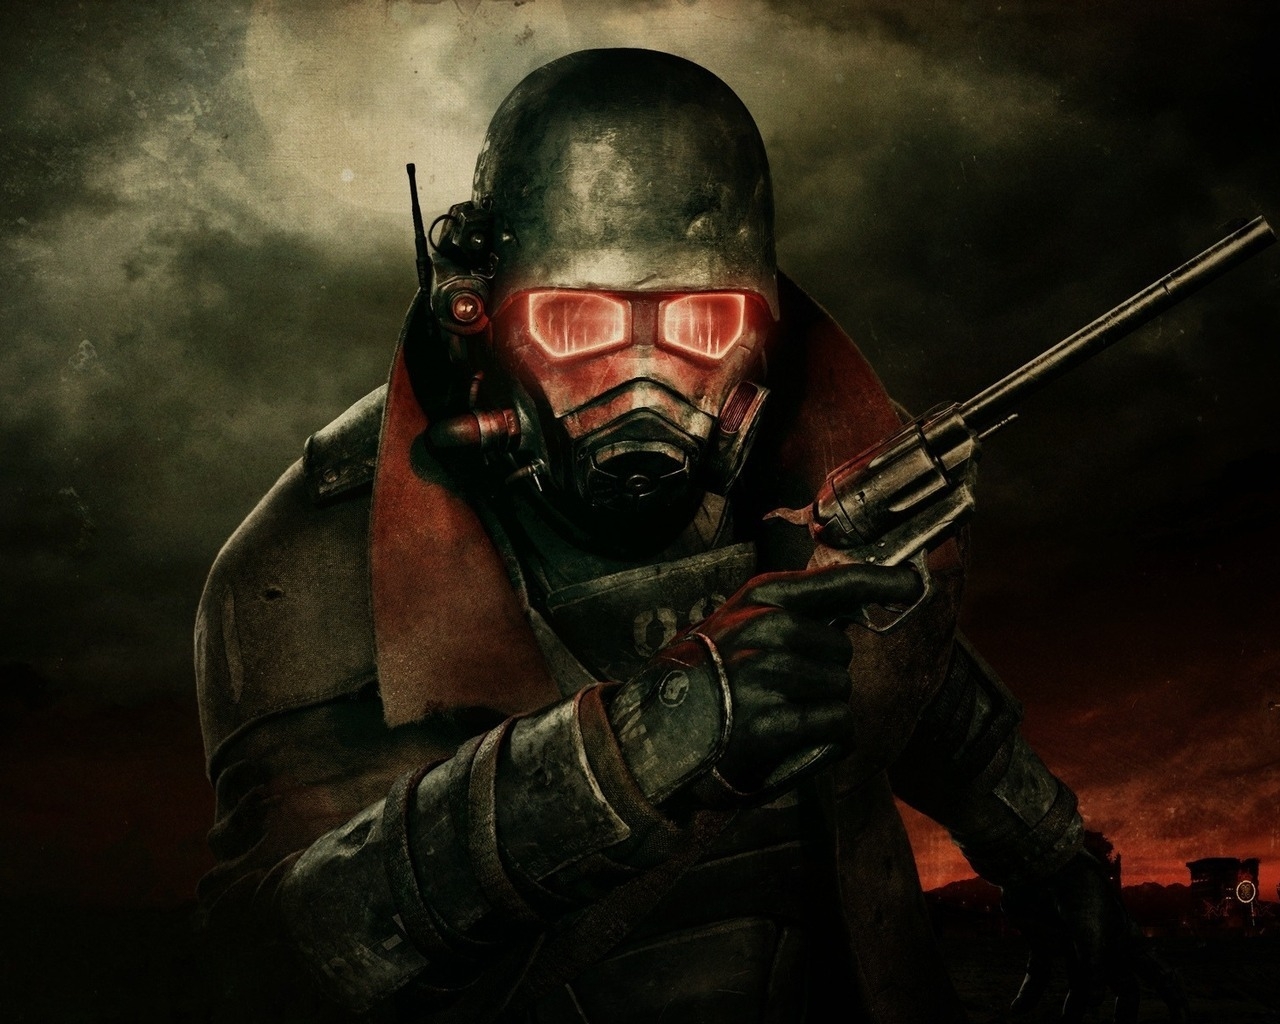 Fallout 3 New Vegas for 1280 x 1024 resolution